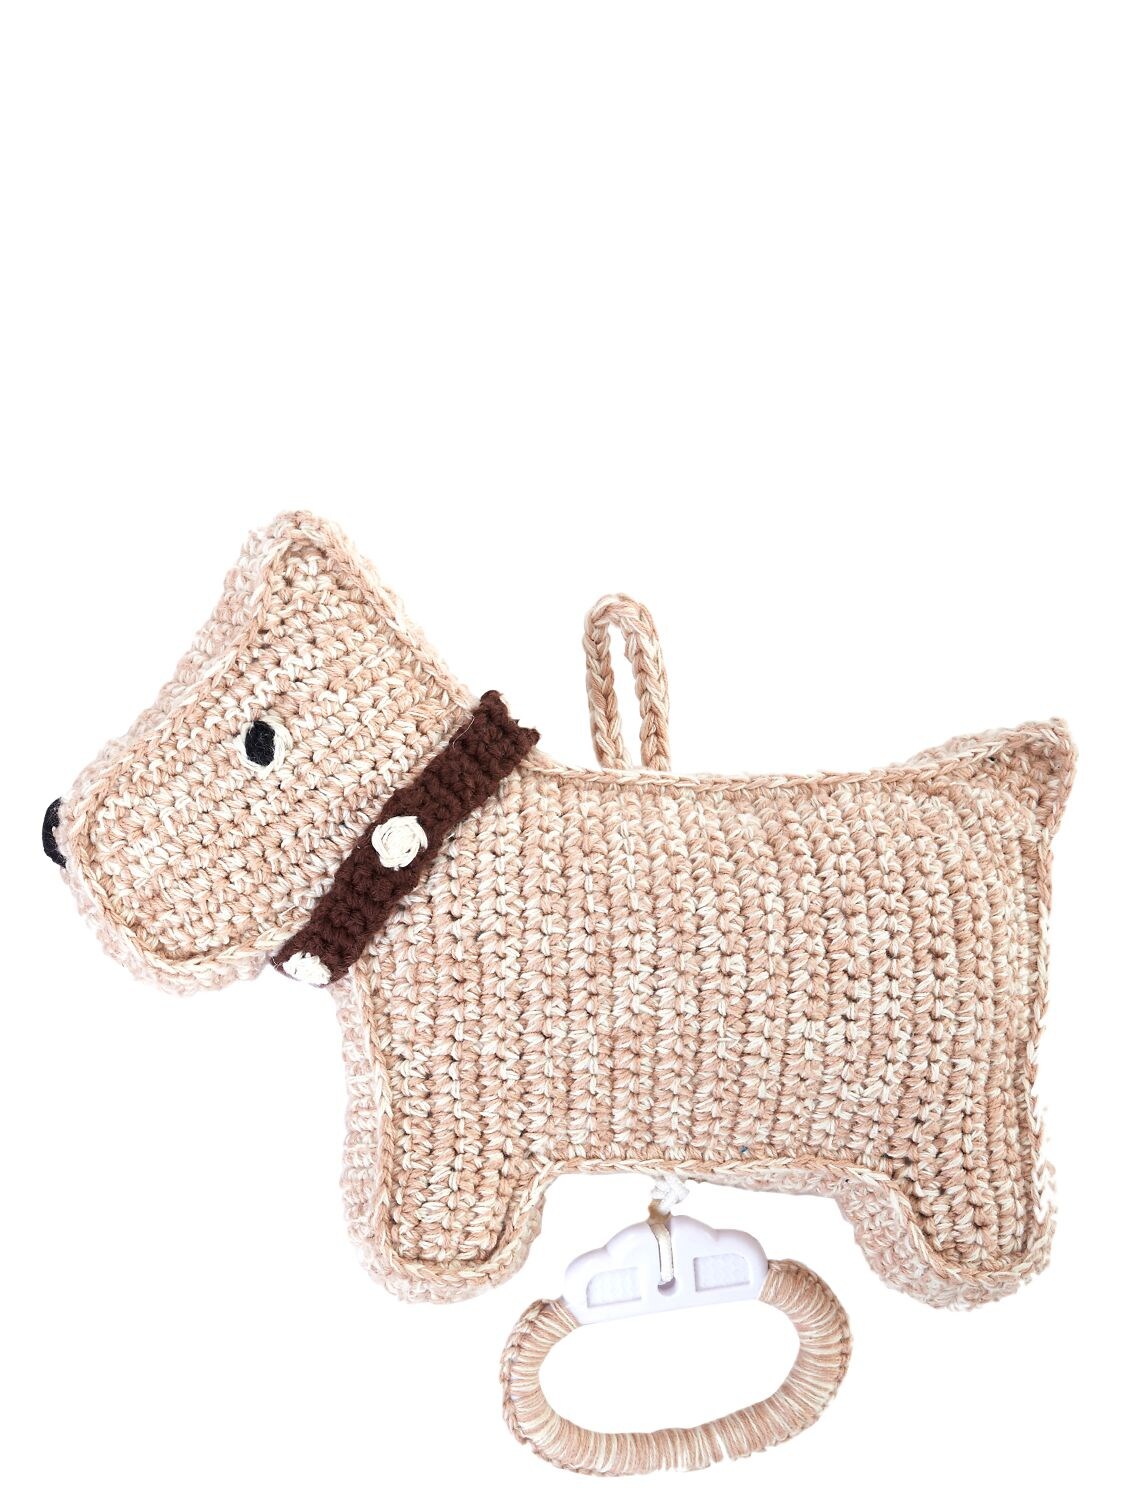 Anne-claire Petit Kids' Hand-crocheted Dog W/ Music Box In Beige